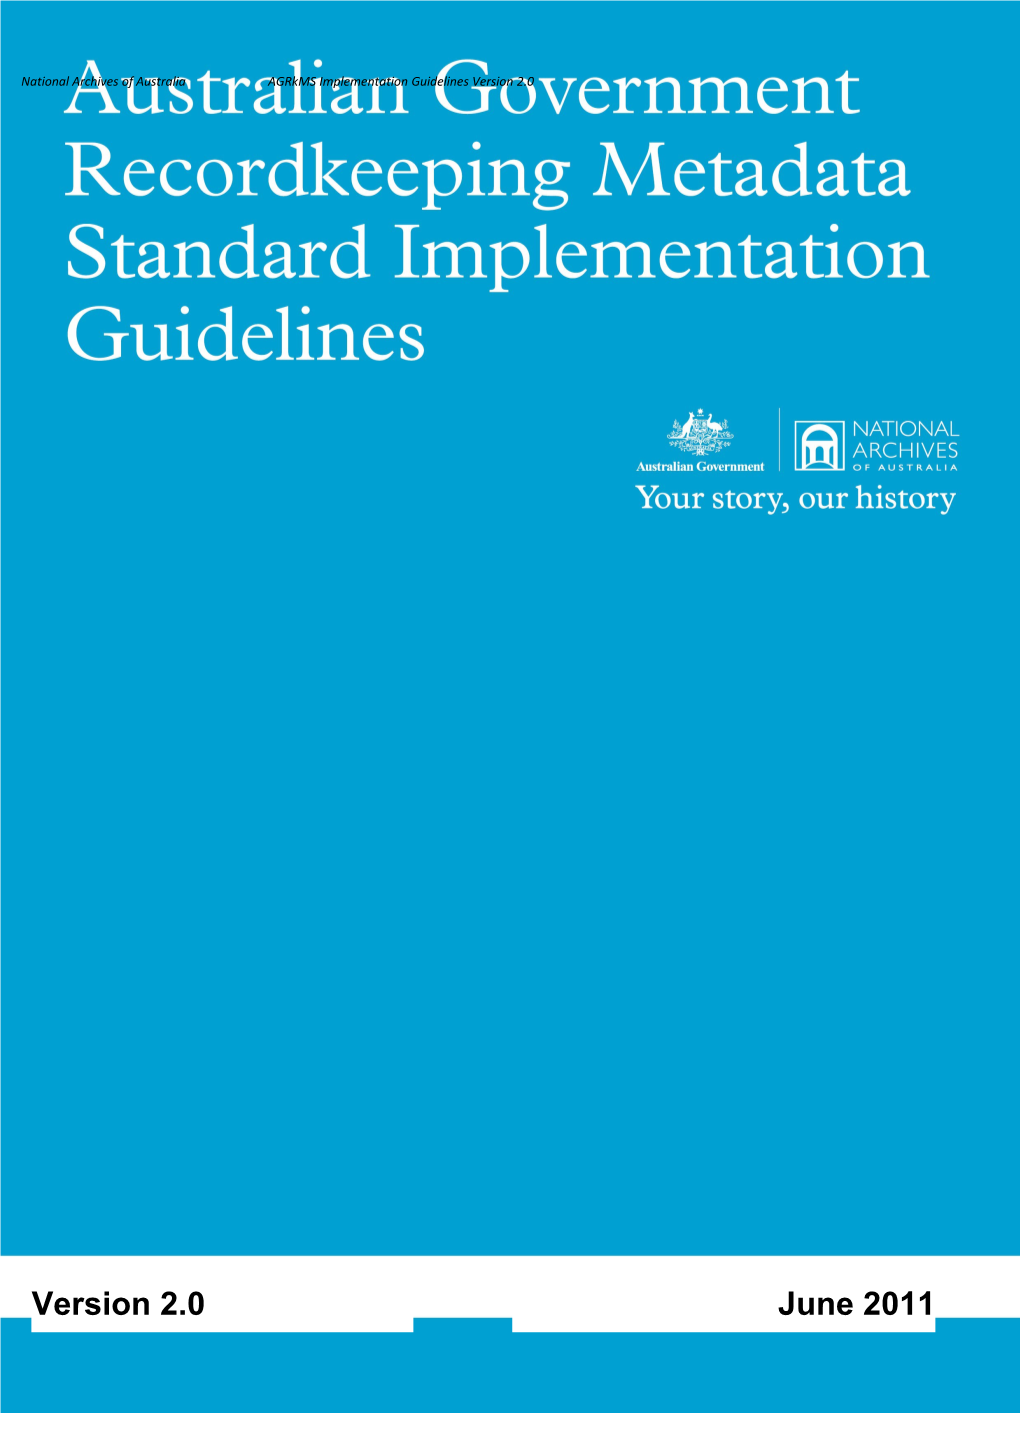 National Archives of Australia Agrkms Implementation Guidelines Version 2.0